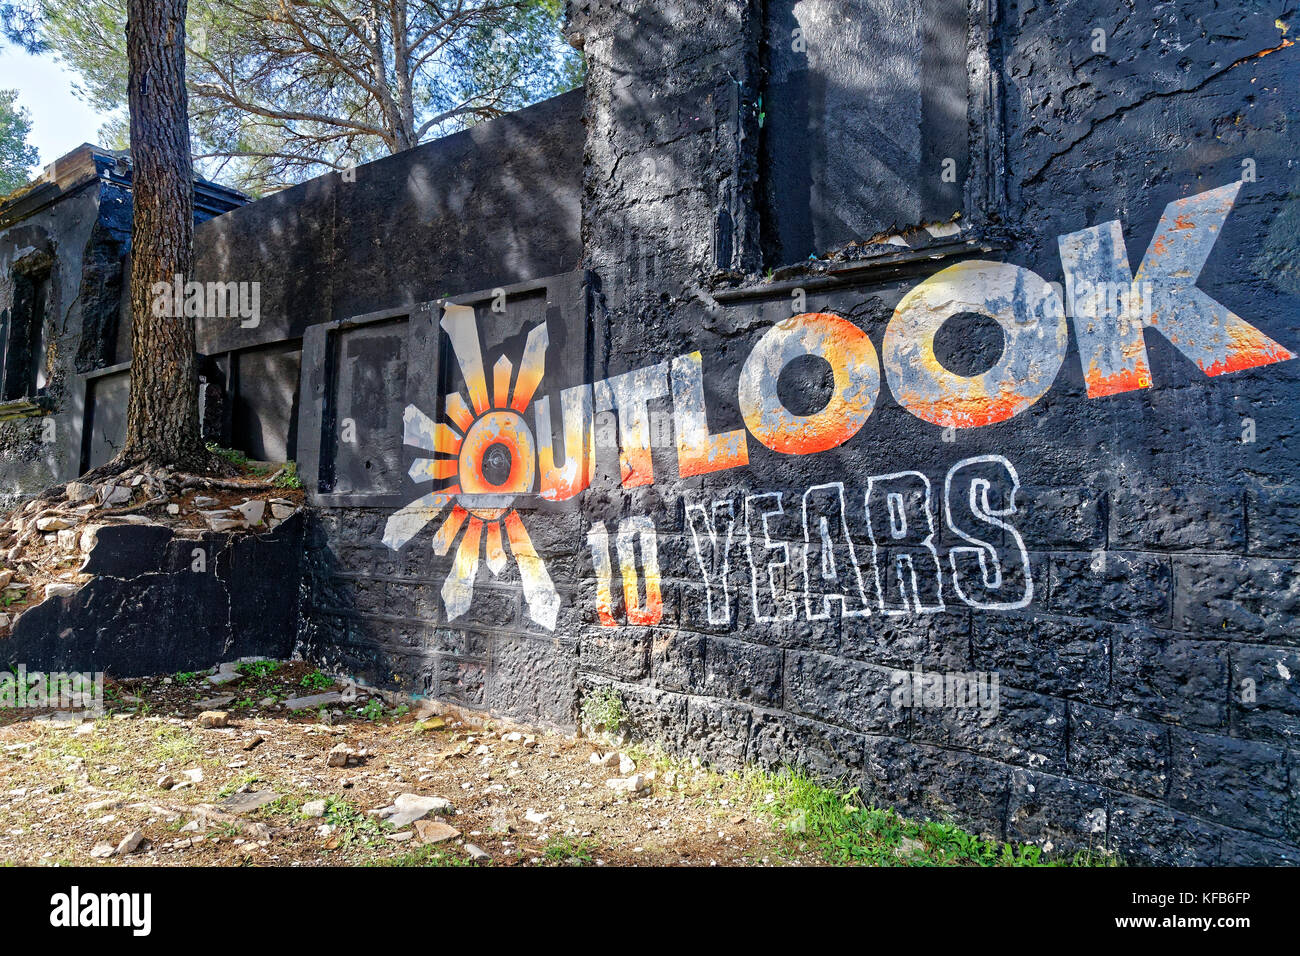 PULA, CROATIA - OCTOBER 23, 2017: The Outlook Festival is celebrating 10 years at the beautiful Fort Punta Christo, Pula in Croatia Stock Photo